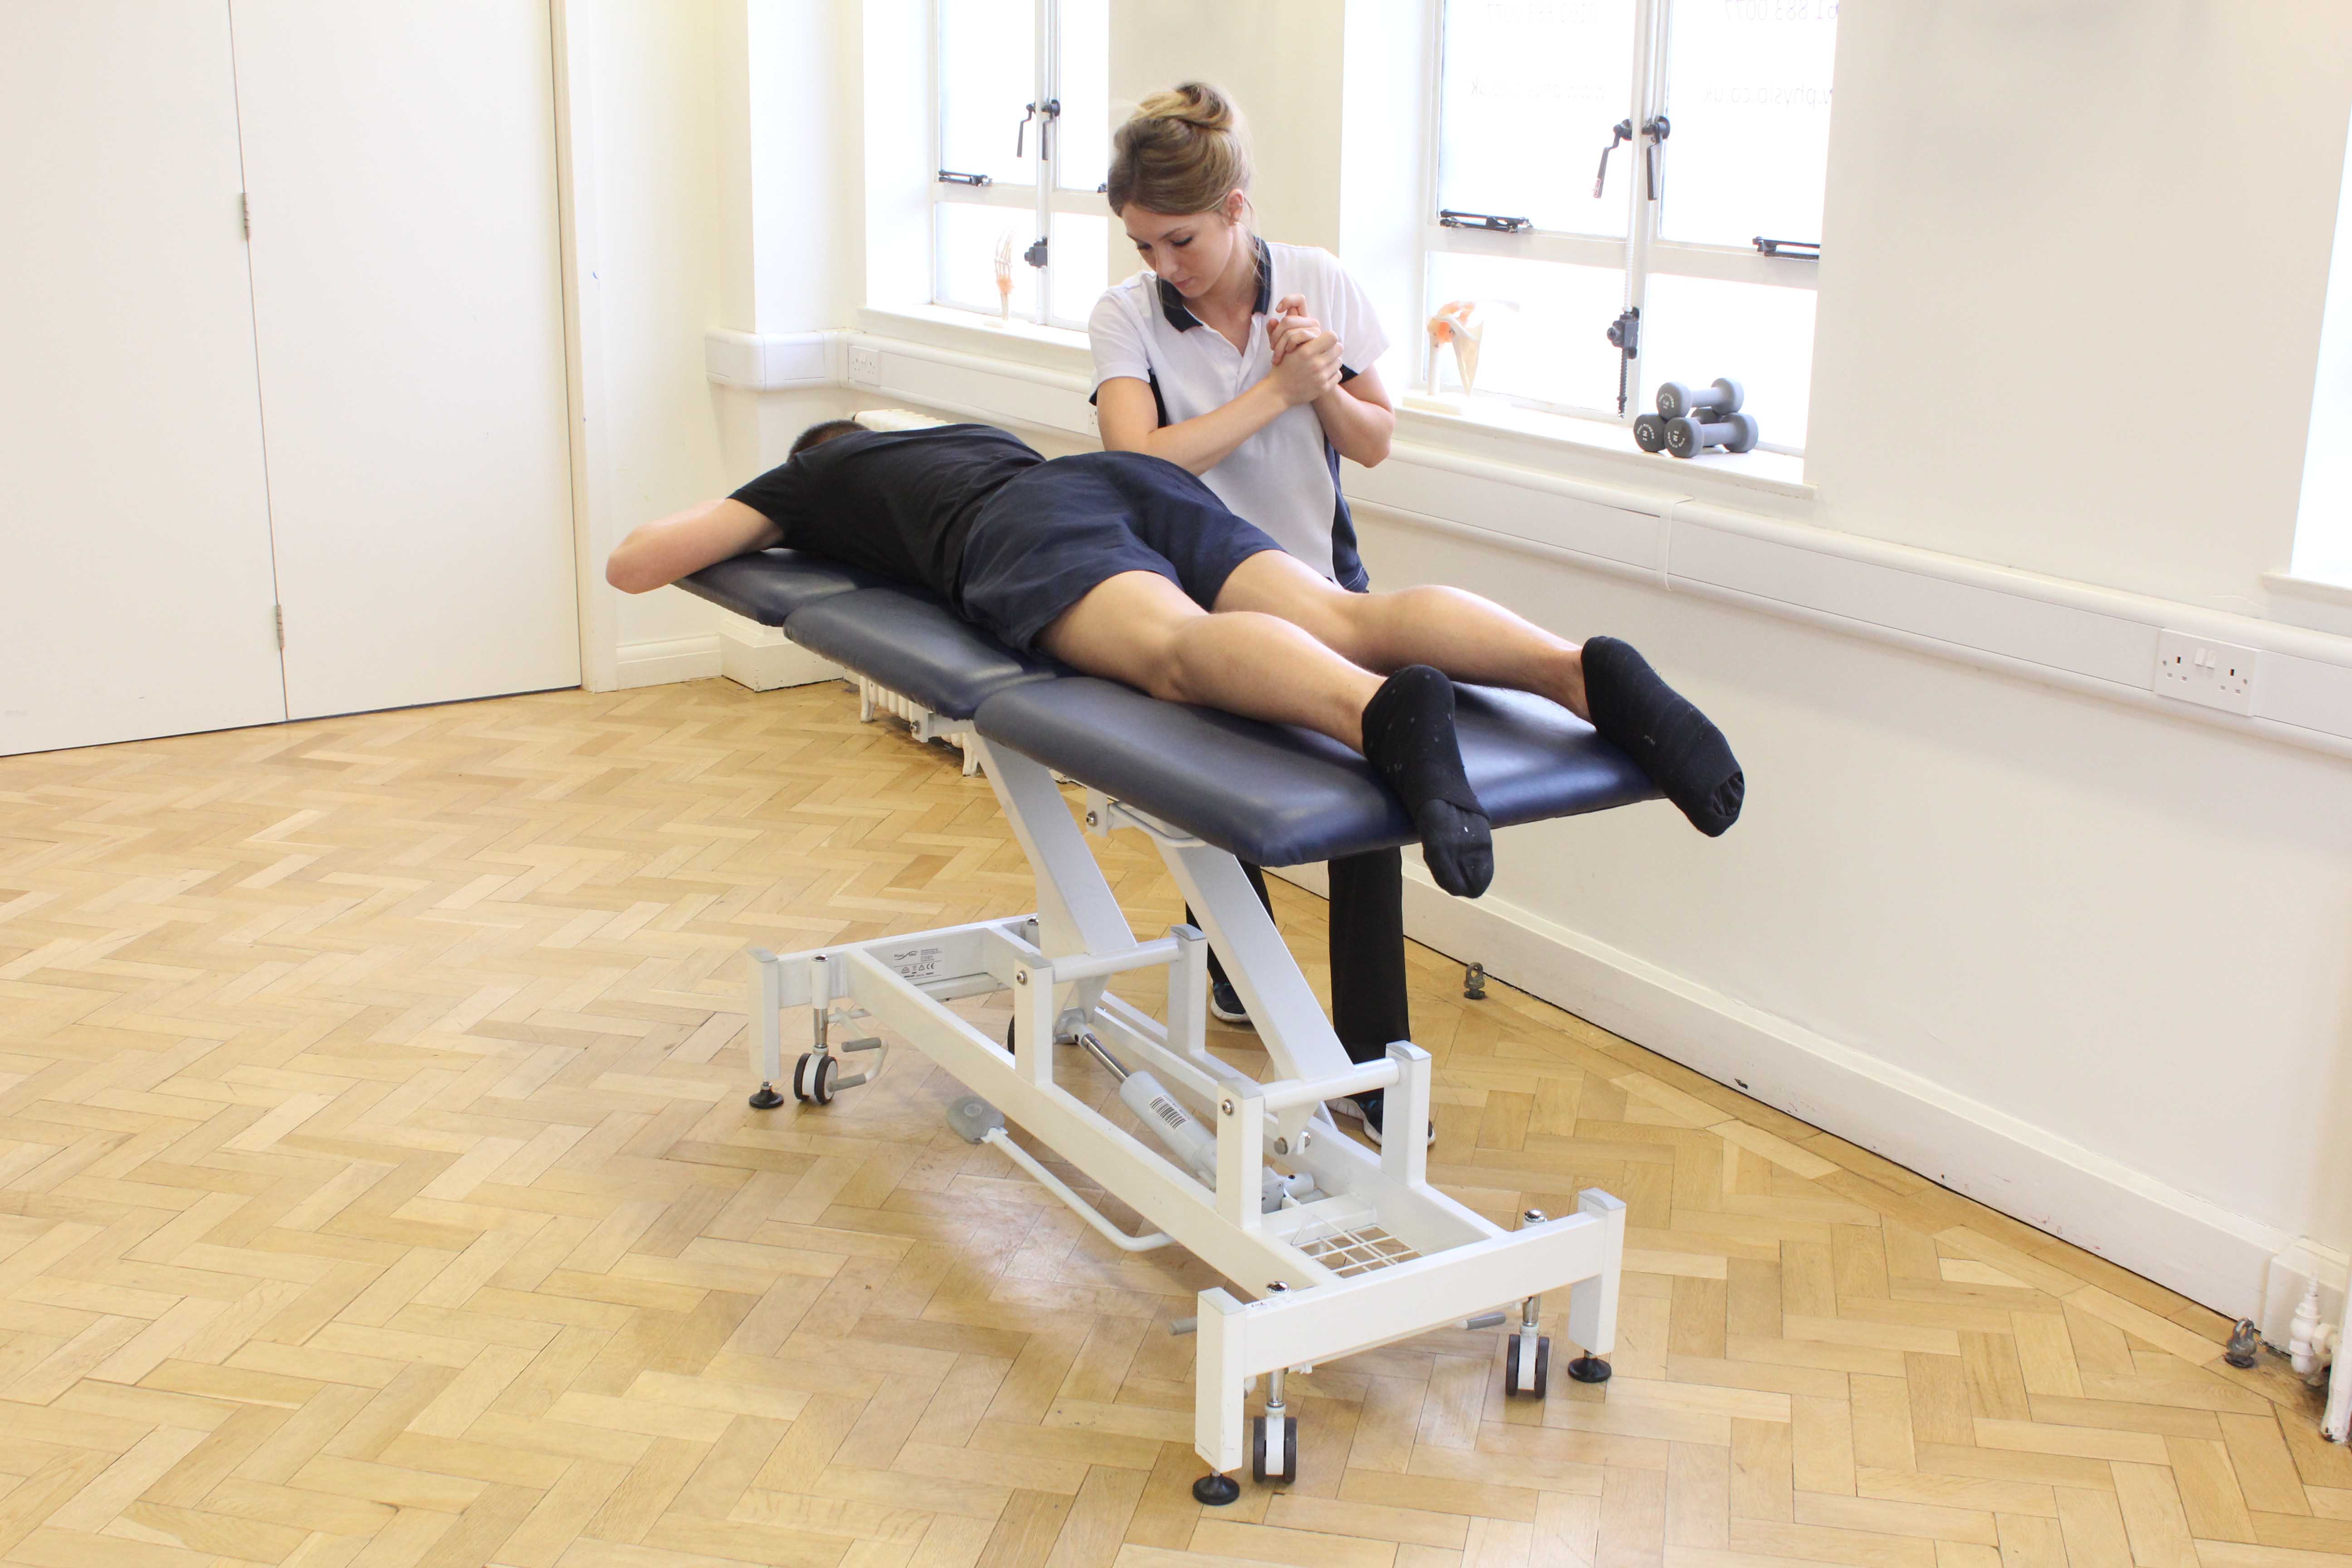 Deep tissue massage of the gluteus maximus muscle by specialist therapist